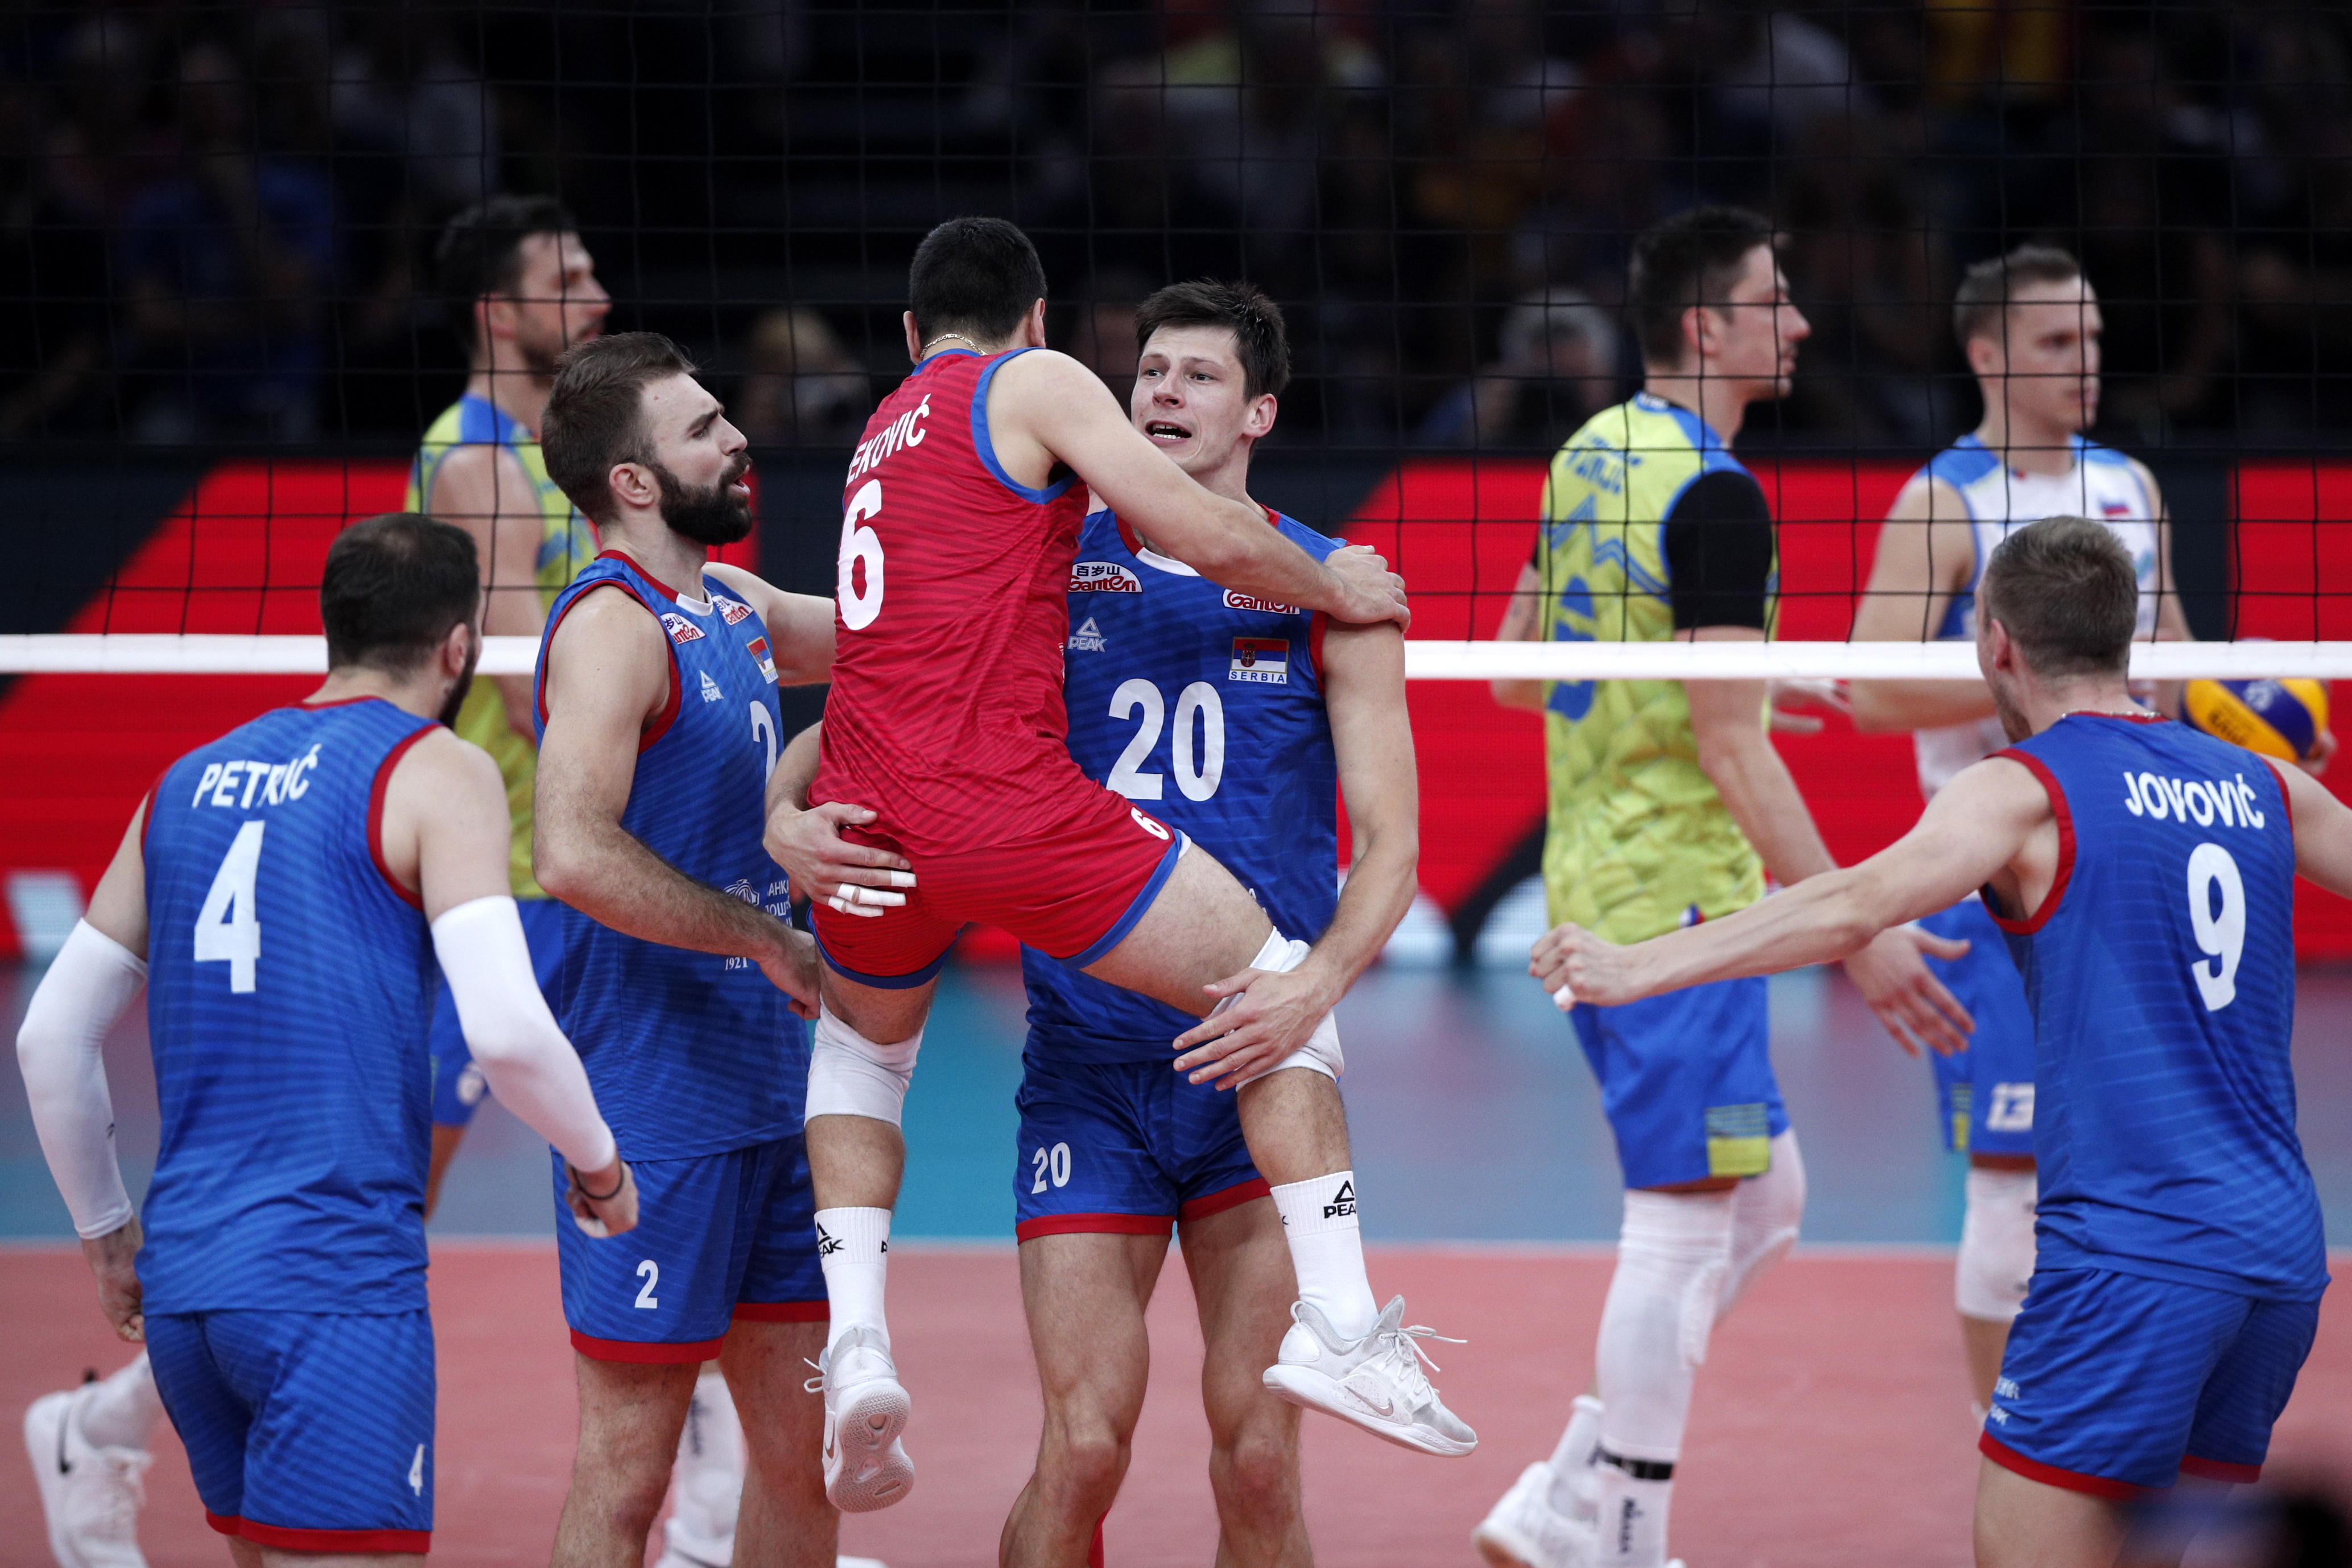 epa07880259 Players of Serbia celebrate winning a point during the EuroVolley Men 2019 Final match between Serbia and Slovenia at the Accorhotels Arena in Paris, France, 29 September 2019.  EPA/YOAN VALAT